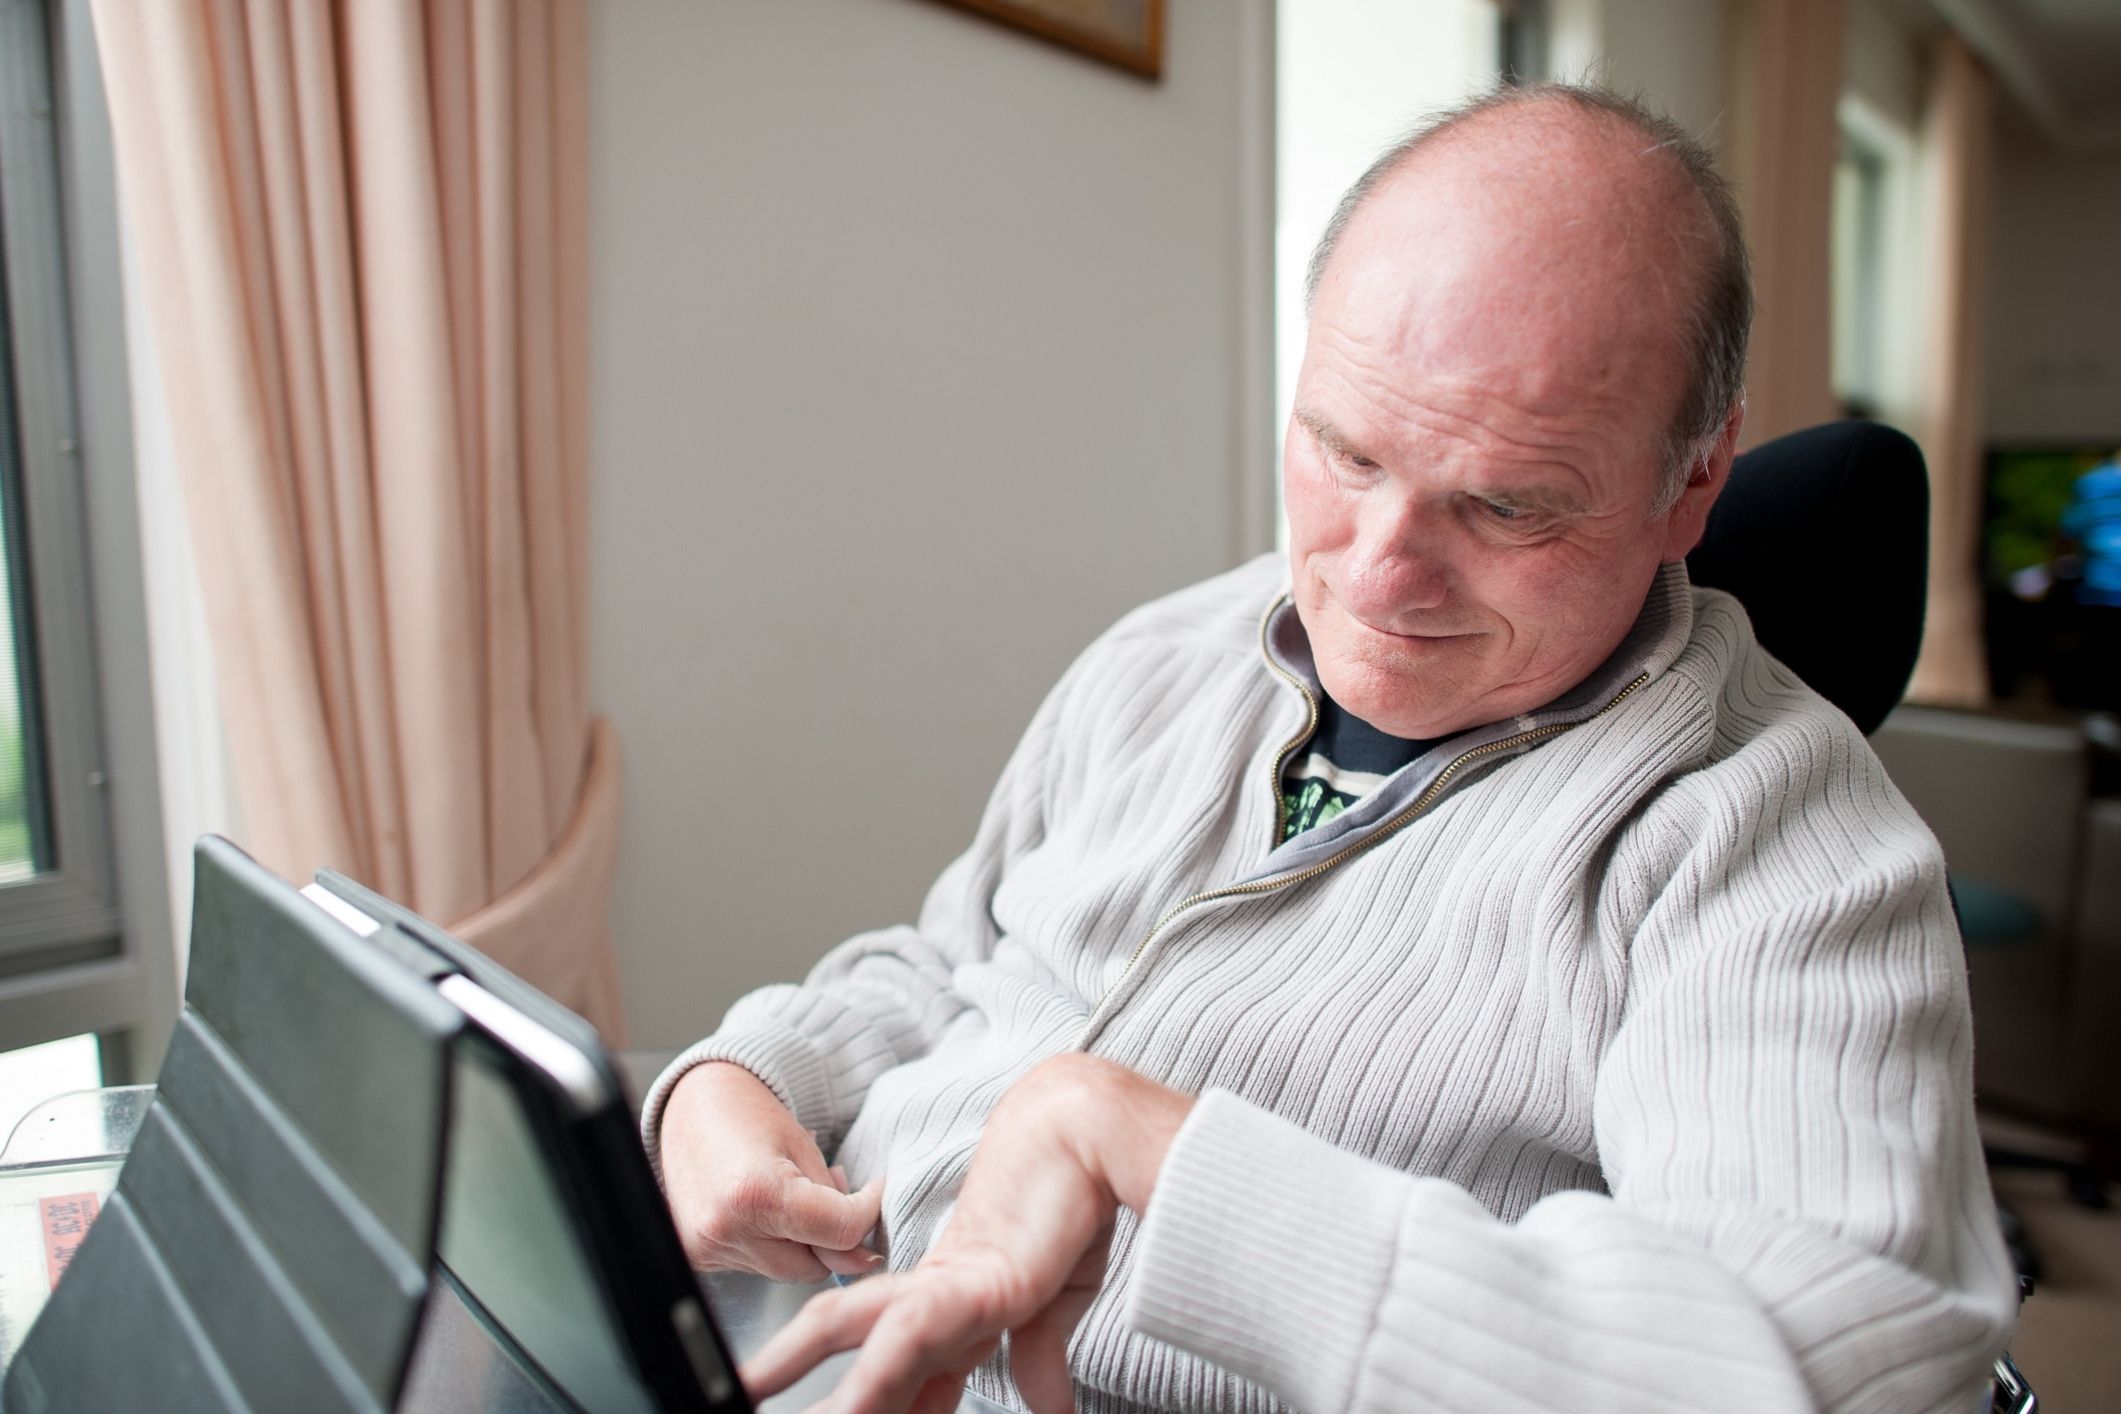 Working from home may be used as loophole to marginalise workers with disabilities